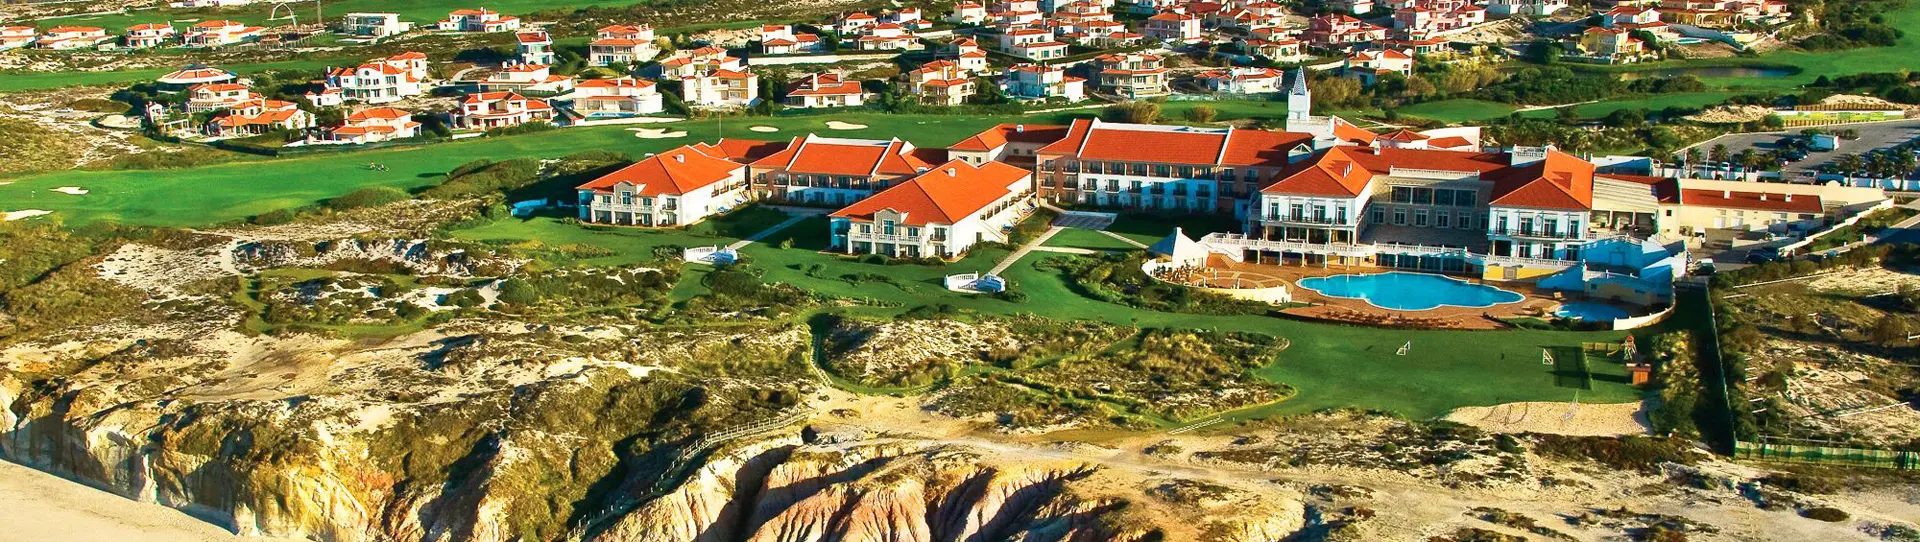 Portugal golf holidays - 4 Nights BB & 3 Golf Rounds<br>Silver Coast Golf Package - Photo 3